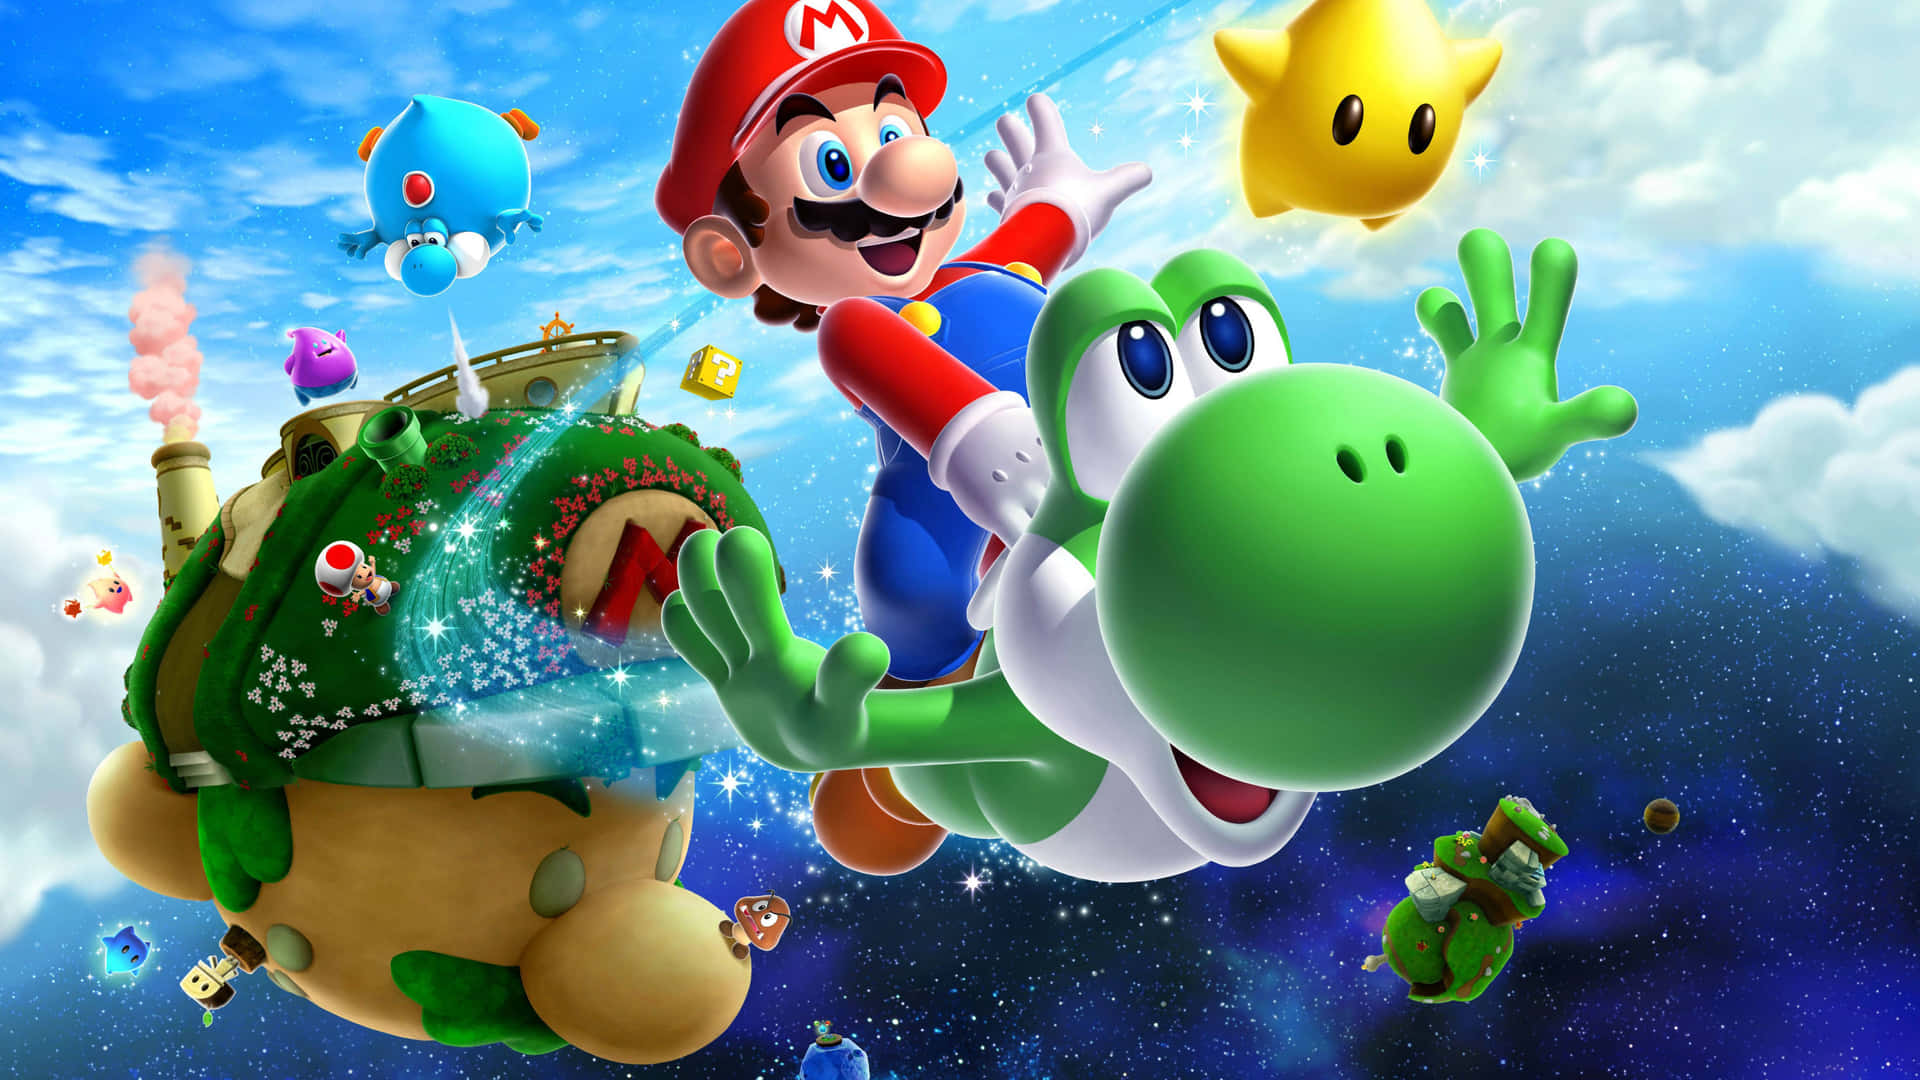 Get ready for an out of this world adventure with Super Mario 3D Wallpaper